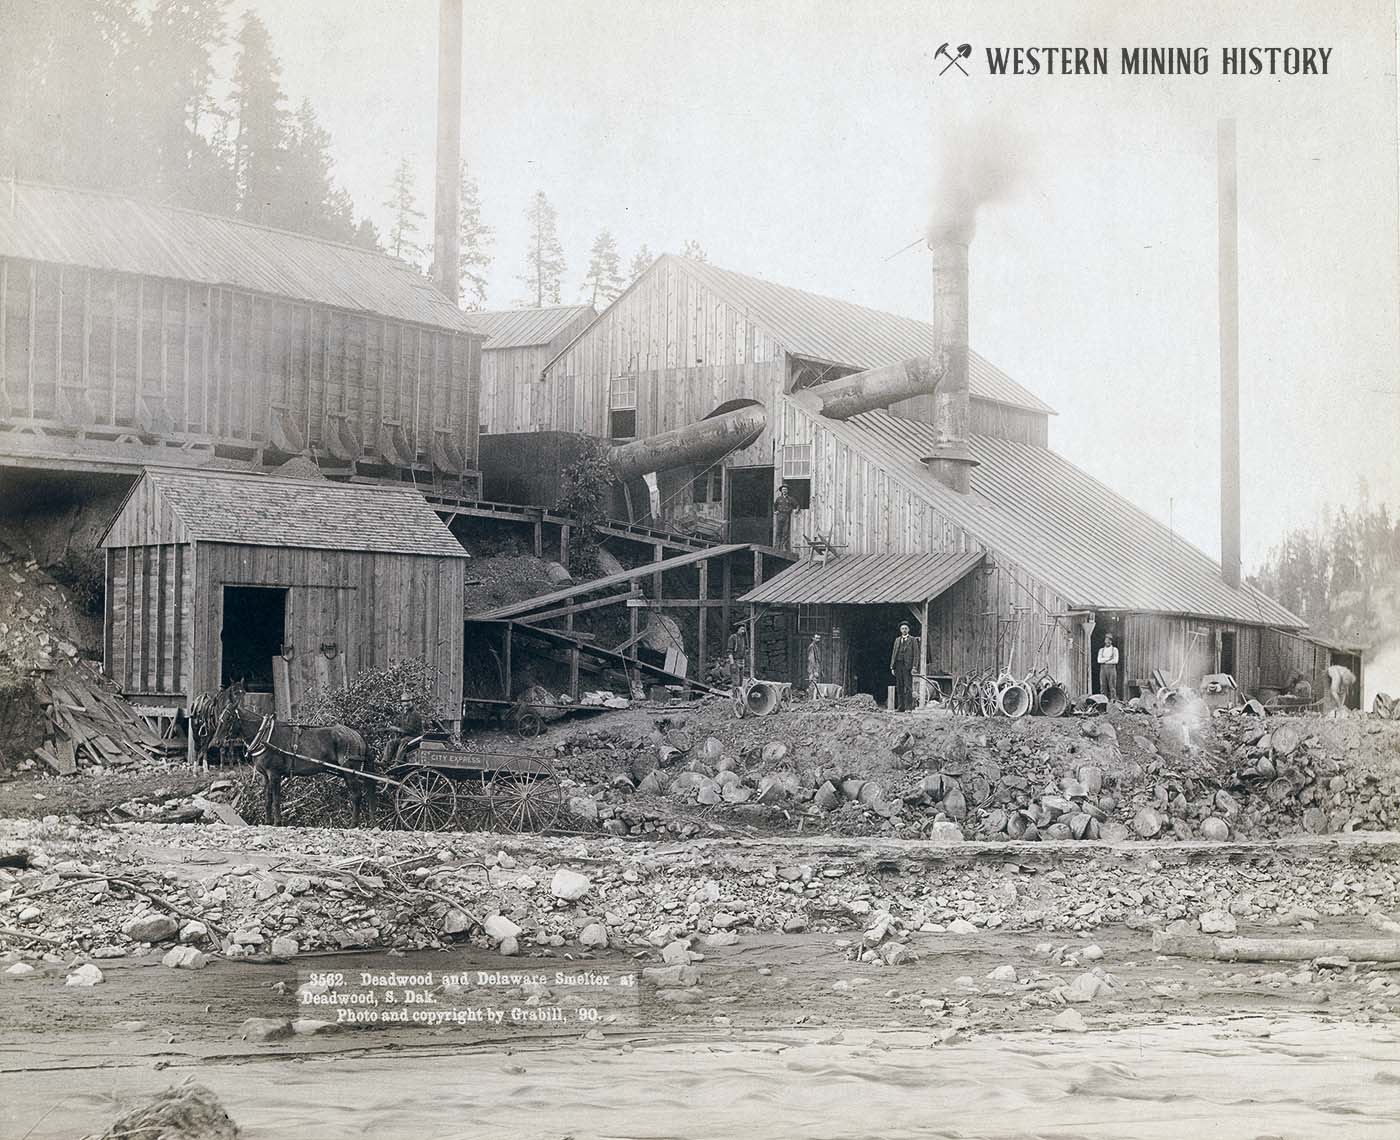 Deadwood and Delaware Smelter 1890